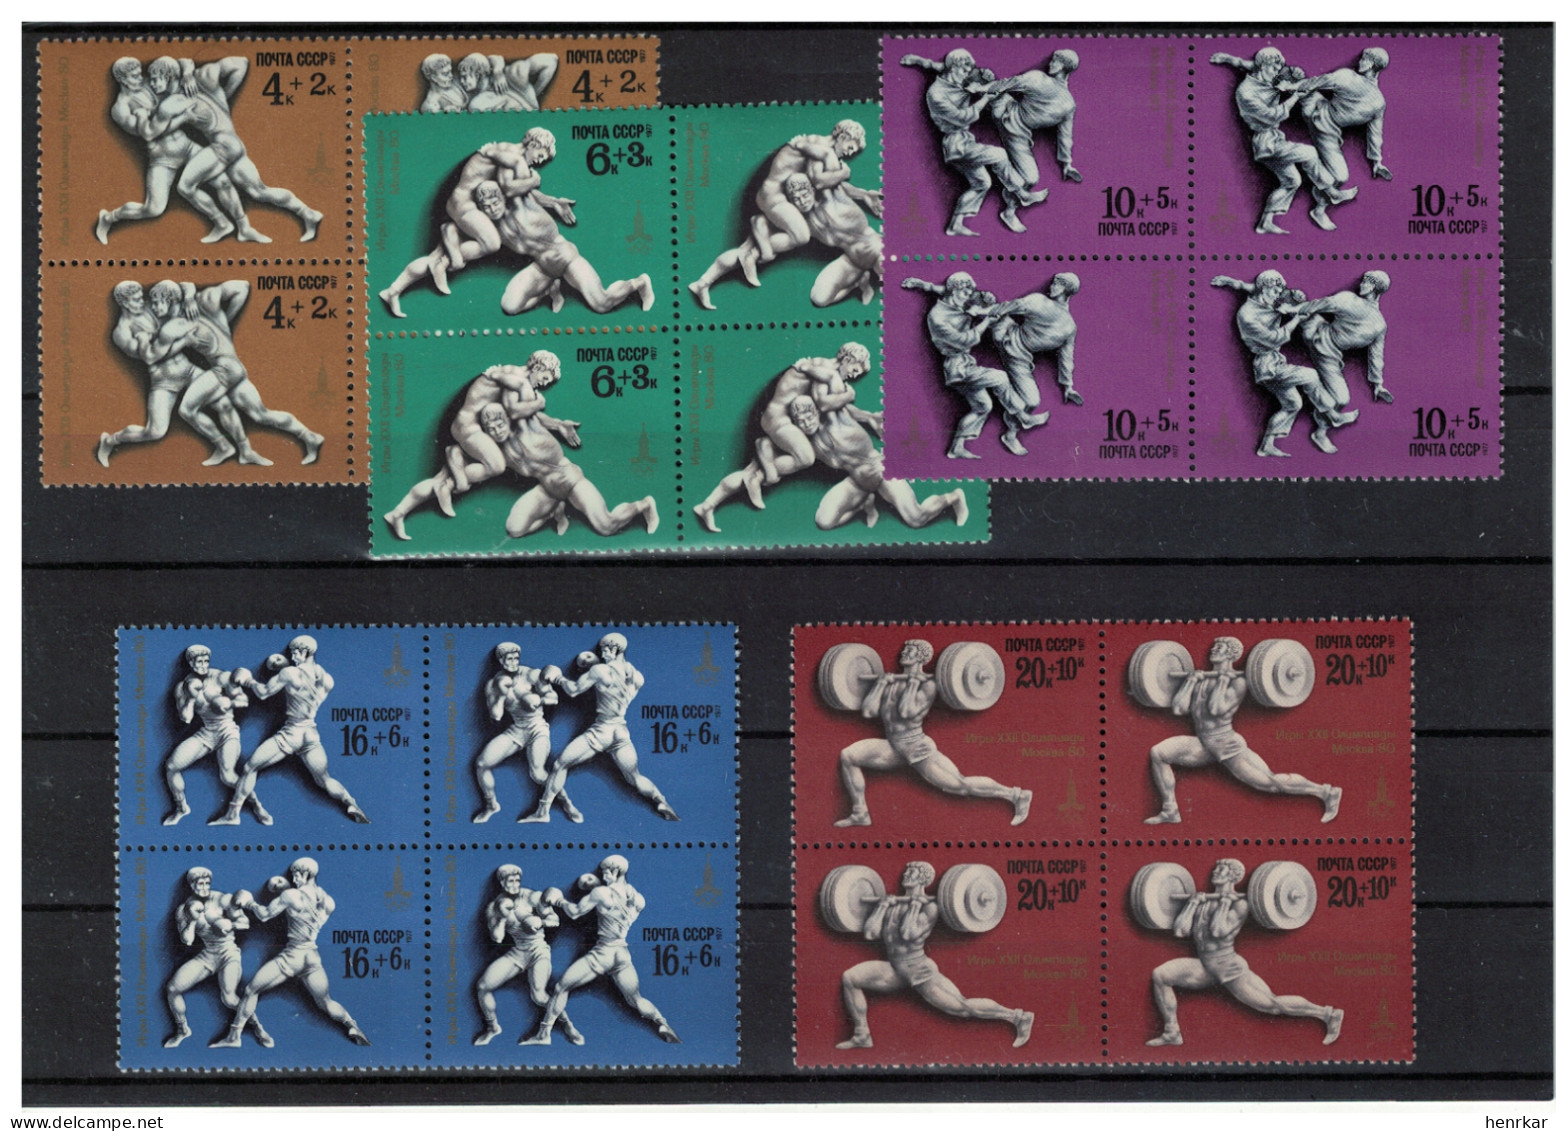 Russia 1977 Olympic Games Moscow 80, Blocks Of 4 MNH OG - Neufs